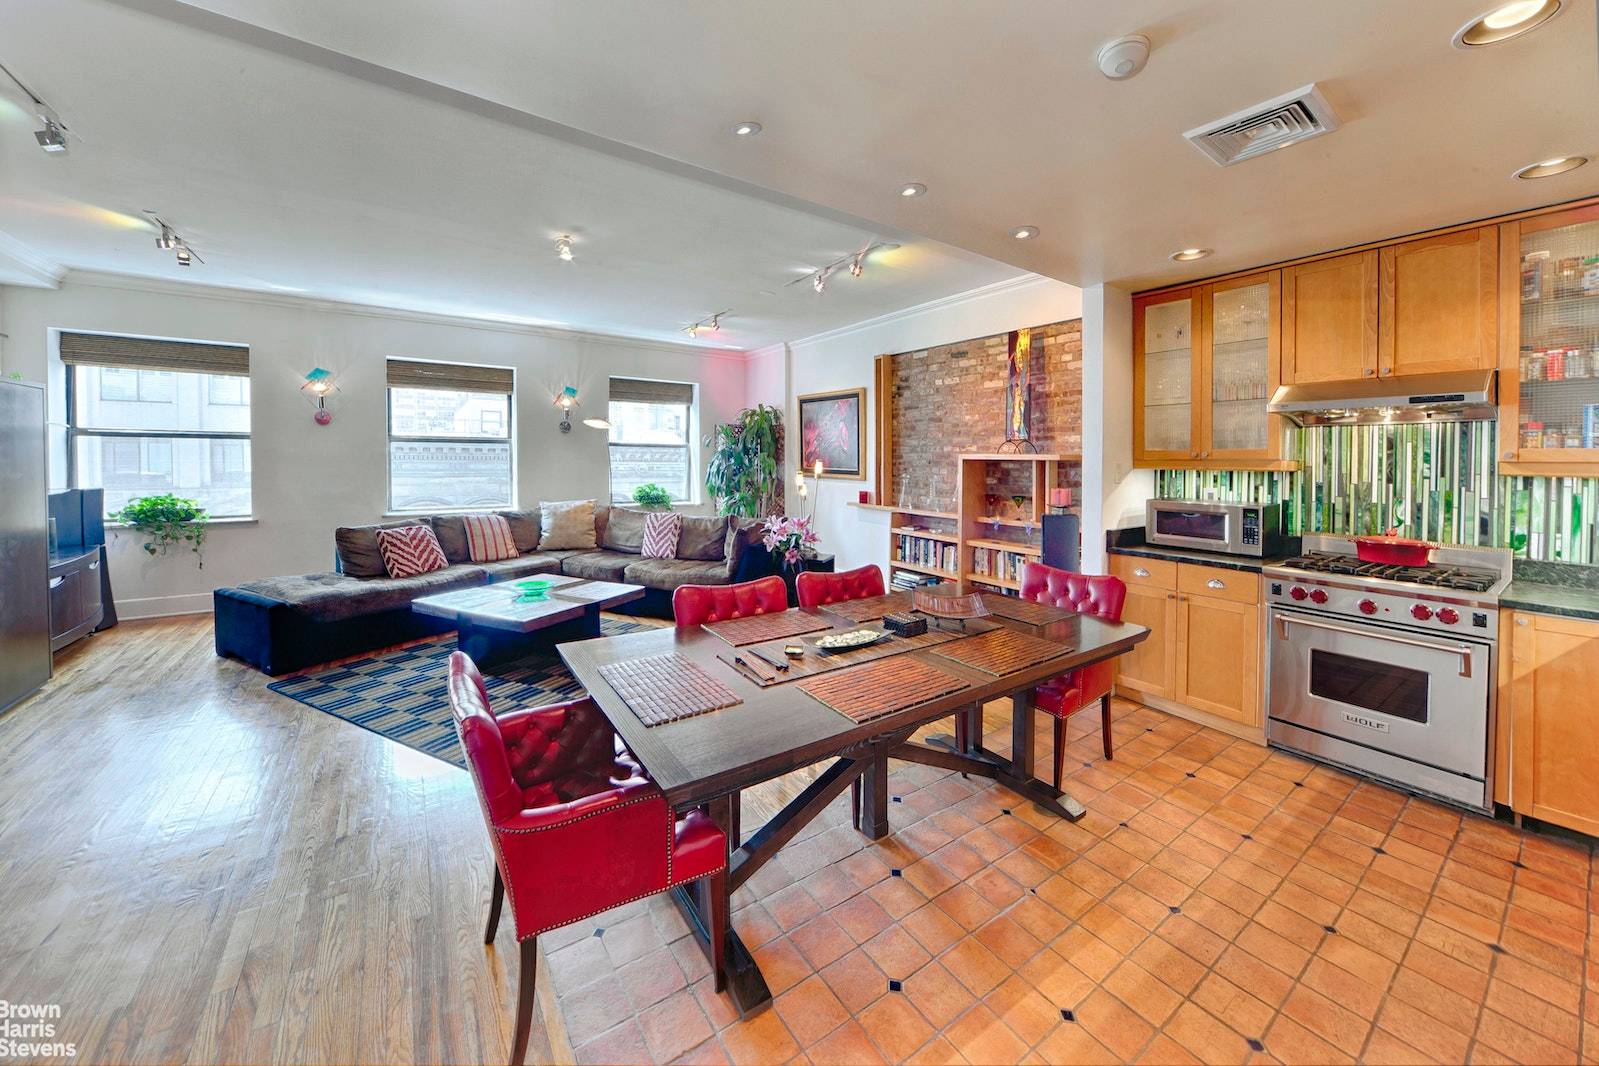 Built in 1895, 100 Reade Street is home to this wonderful spacious 1550 square foot loft style designer Condo facing South and North with 3 bedrooms, 2 bathrooms and a ...